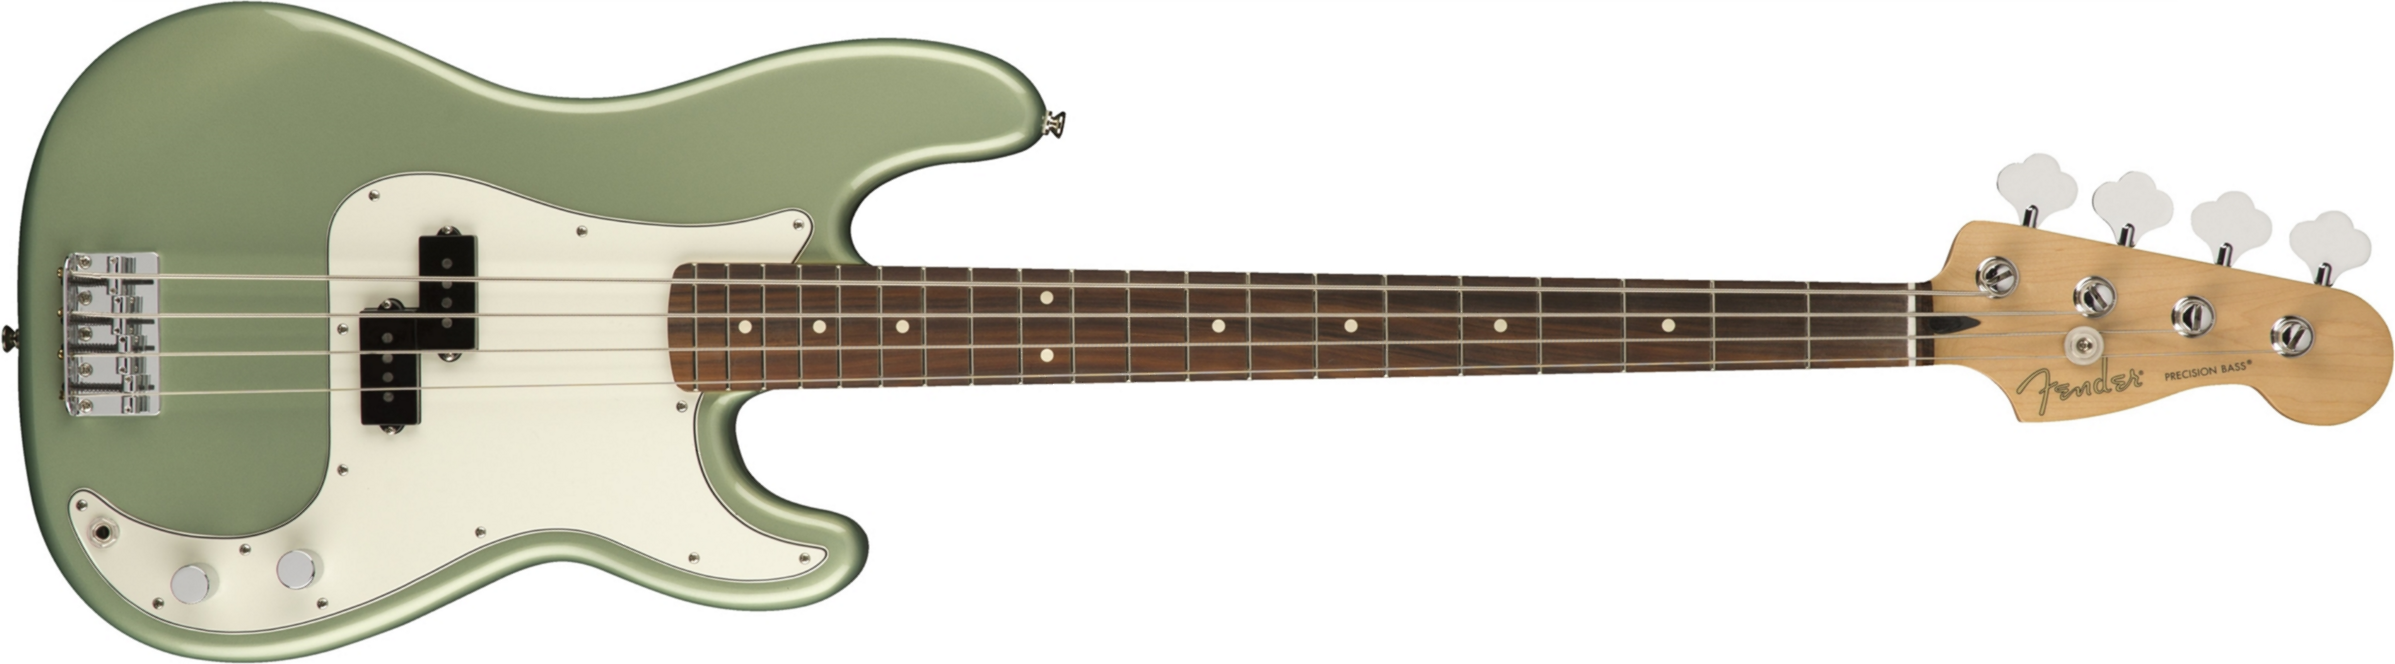 Fender Precision Bass Player Mex Pf - Sage Green Metallic - Basse Électrique Solid Body - Main picture